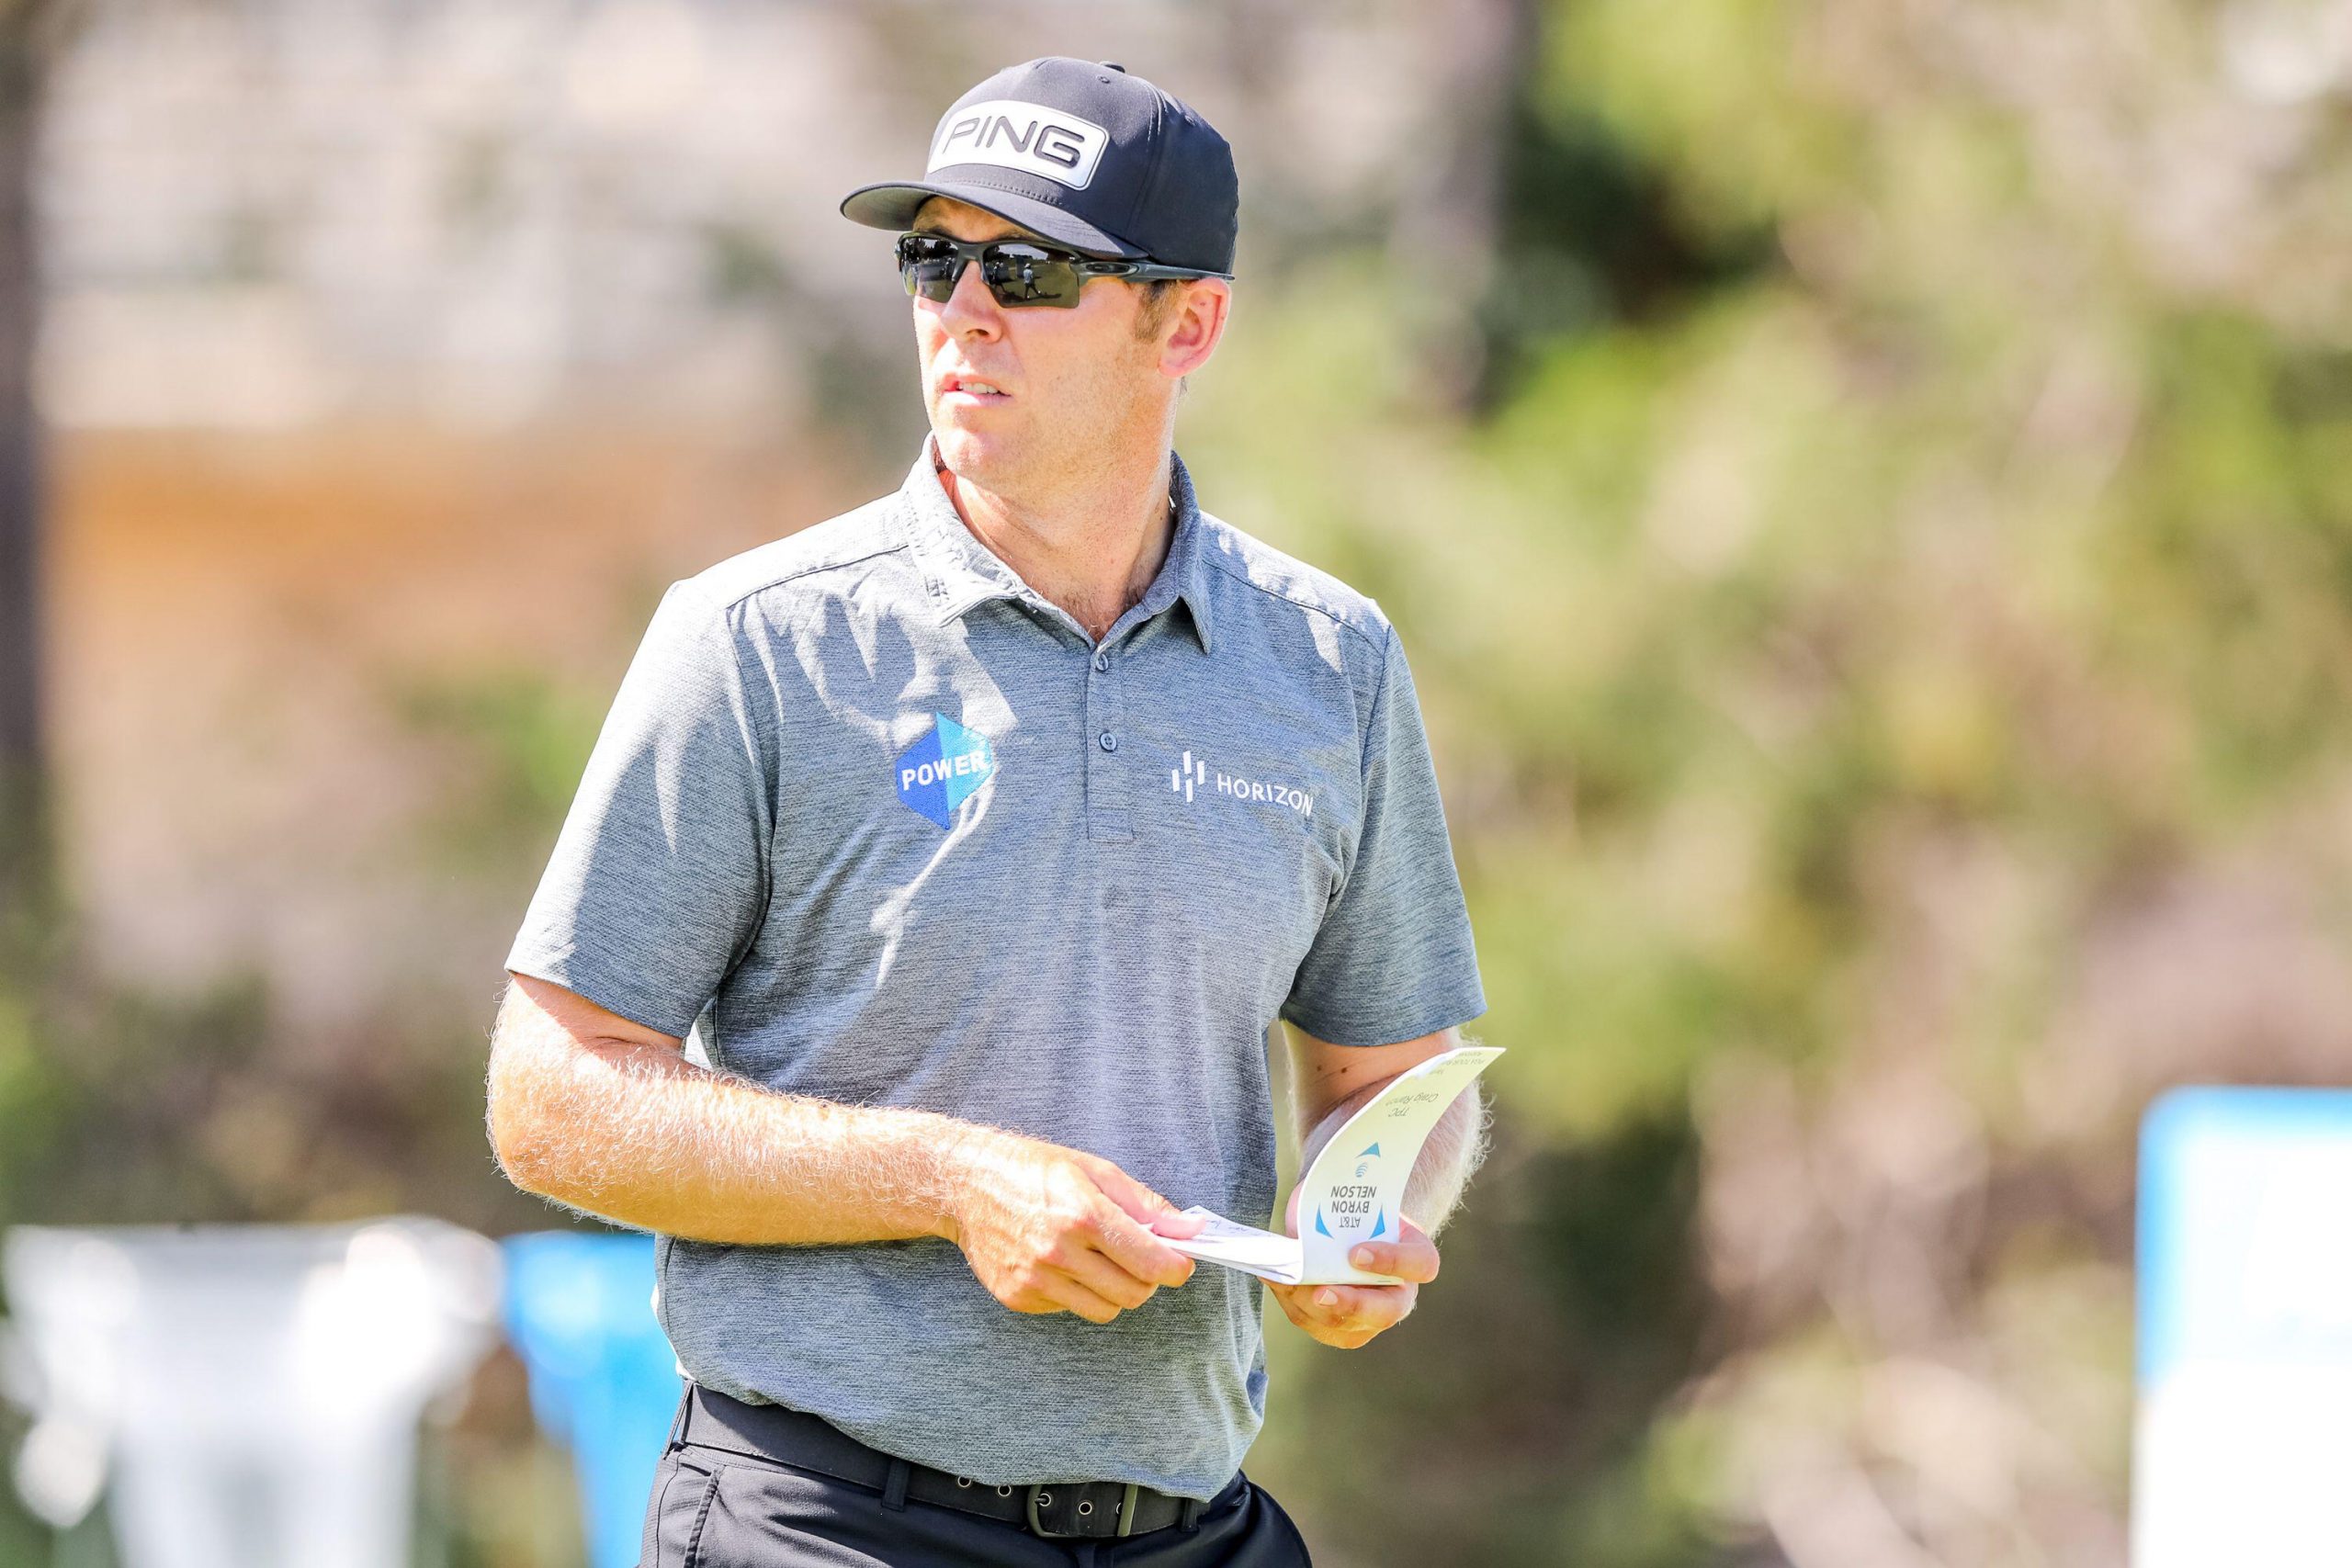 Butterfield Bermuda Championship Betting Preview 2022